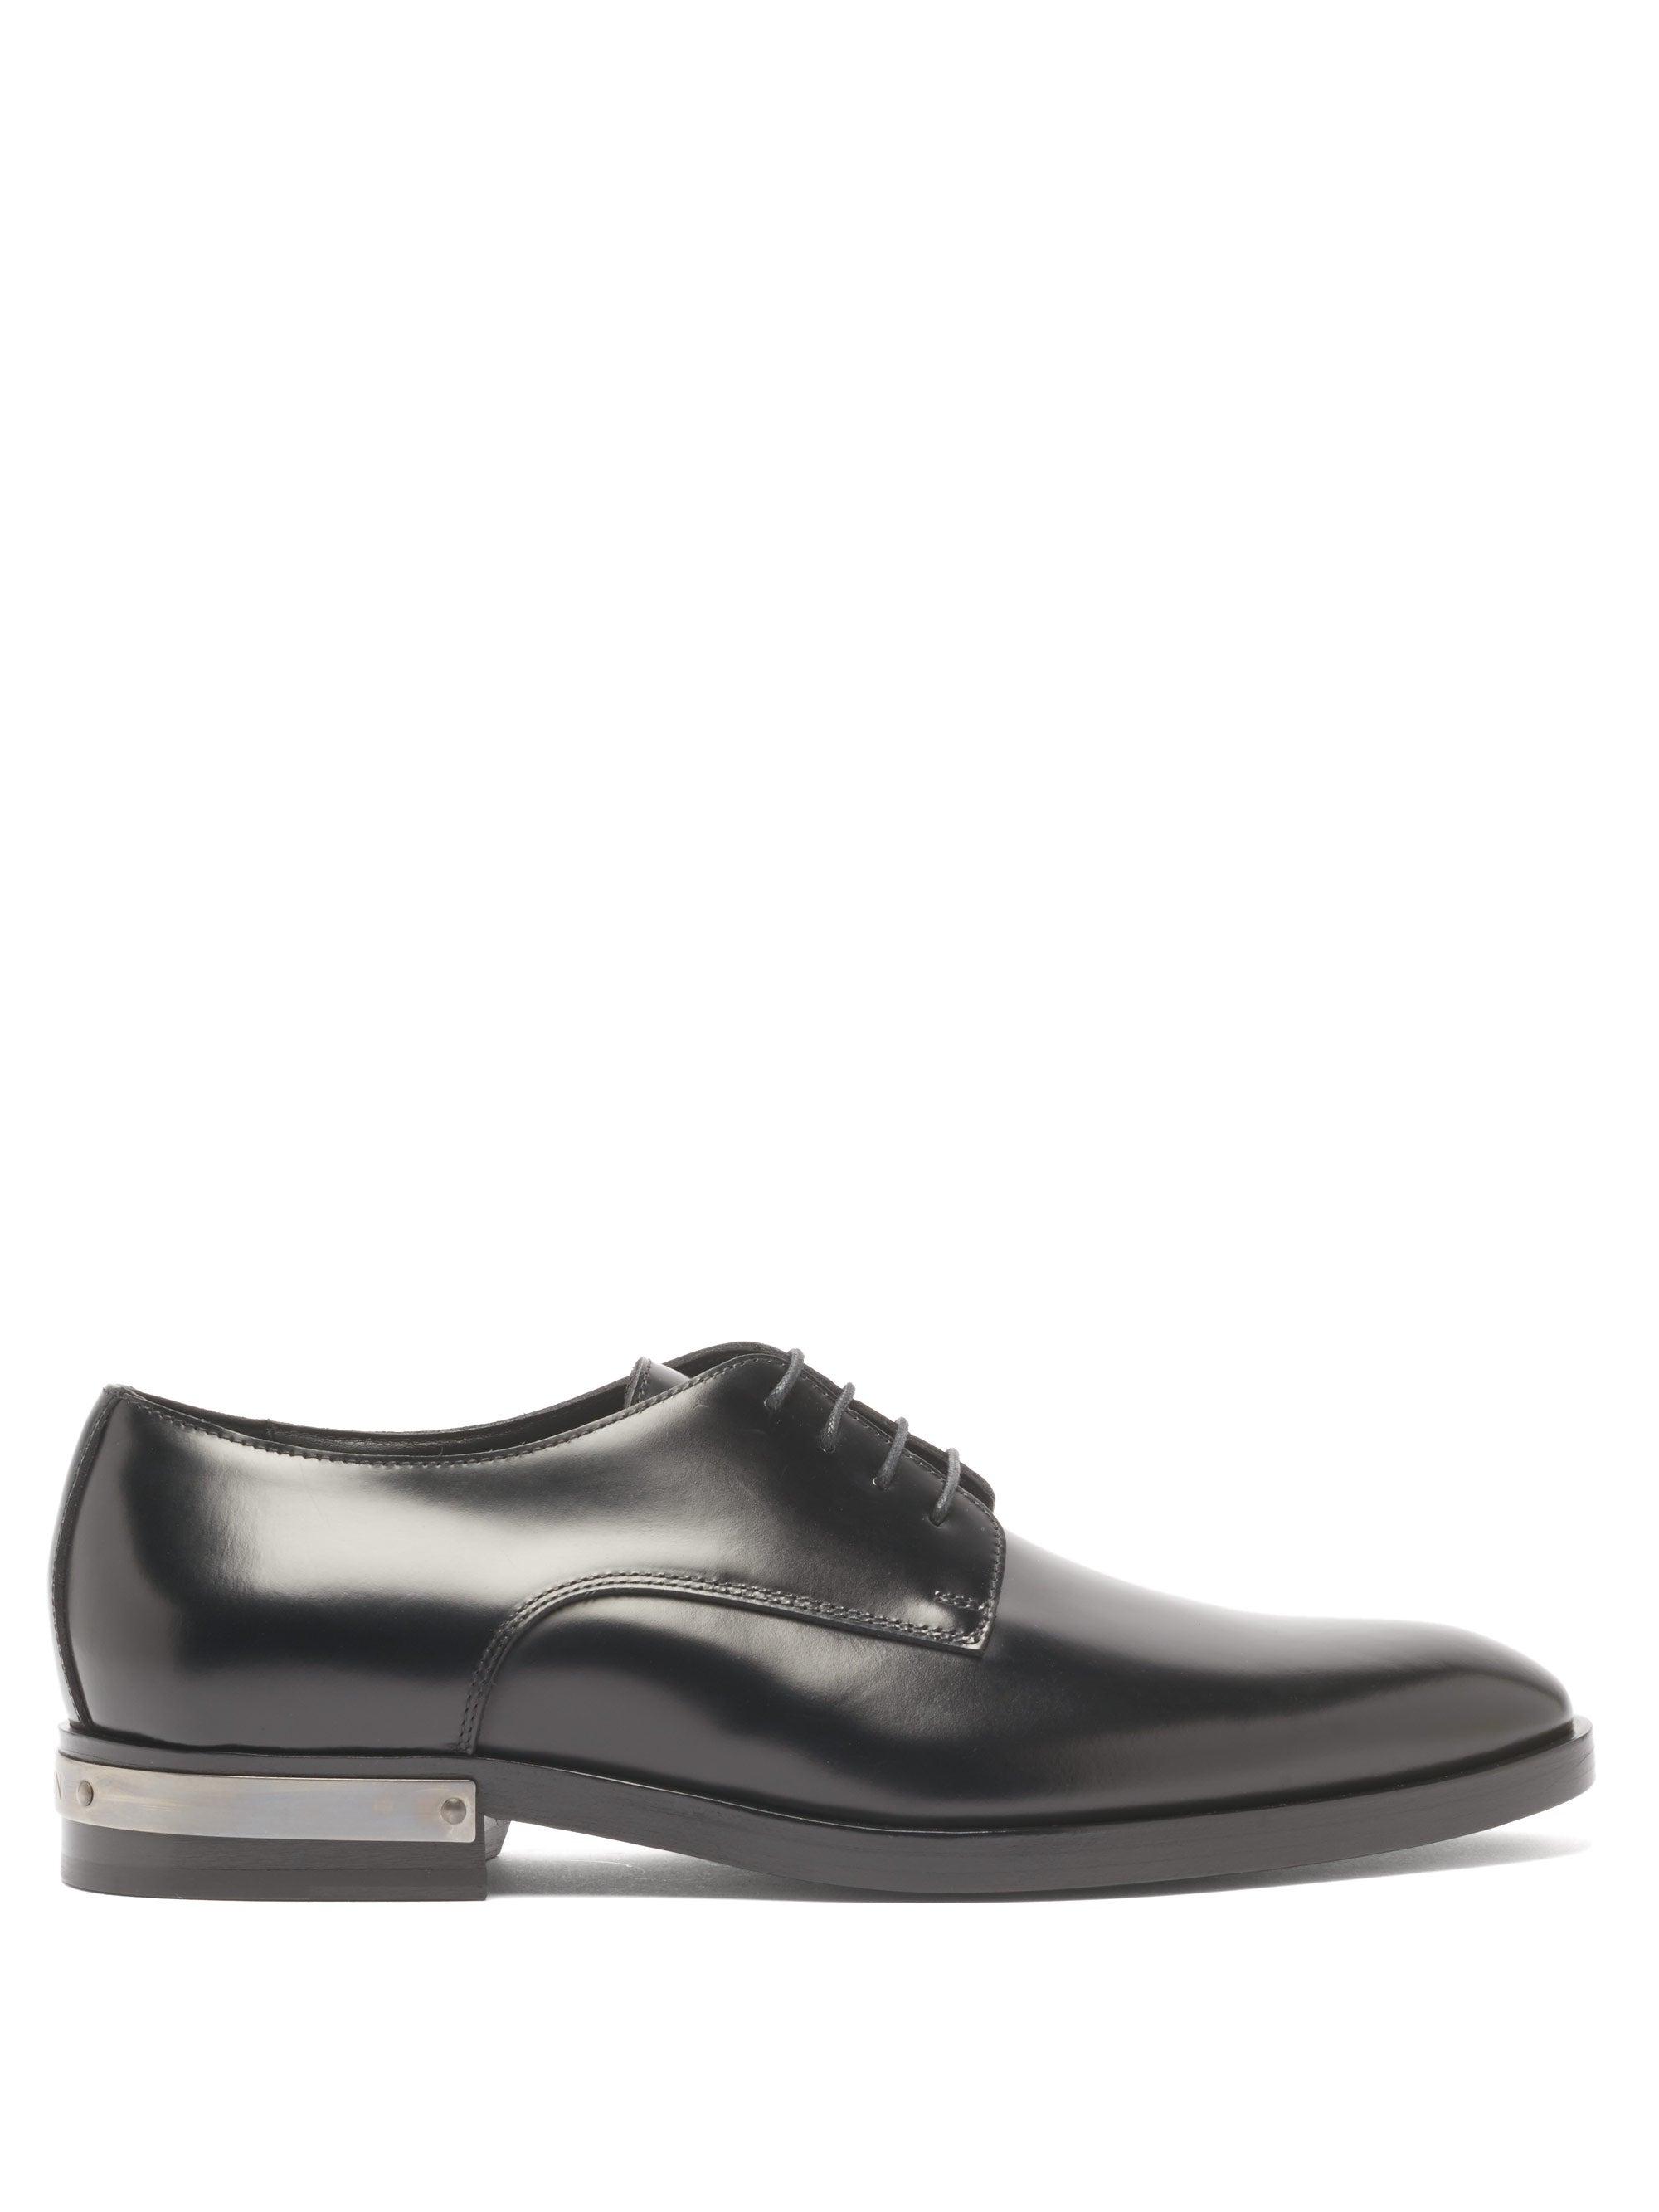 Balmain Prince Leather Derby Shoes in Black for Men | Lyst